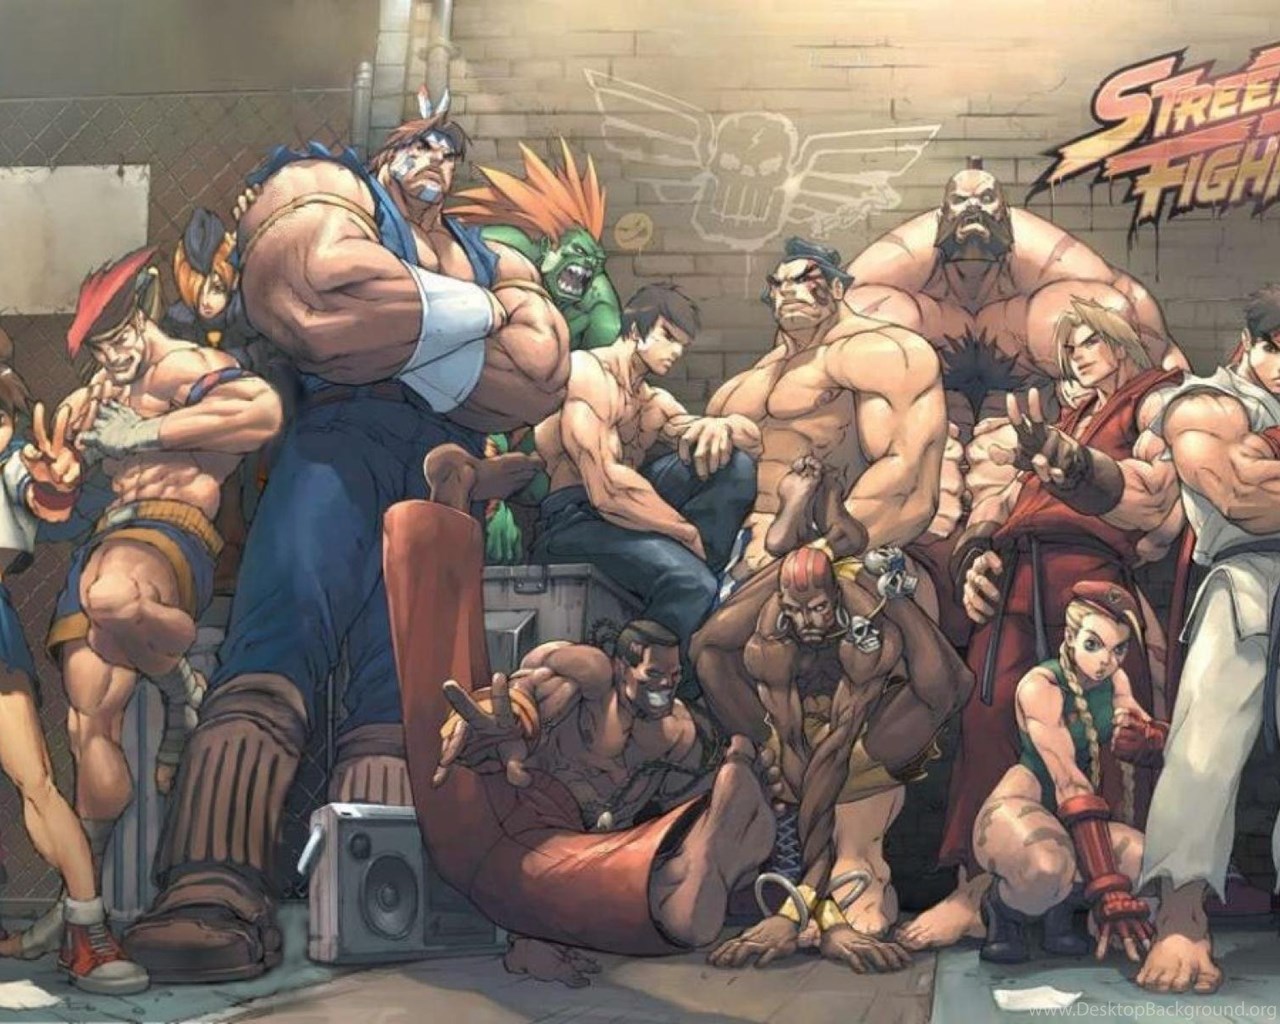 Download Street Fighter Coming To The PS4 & Xbox One? 